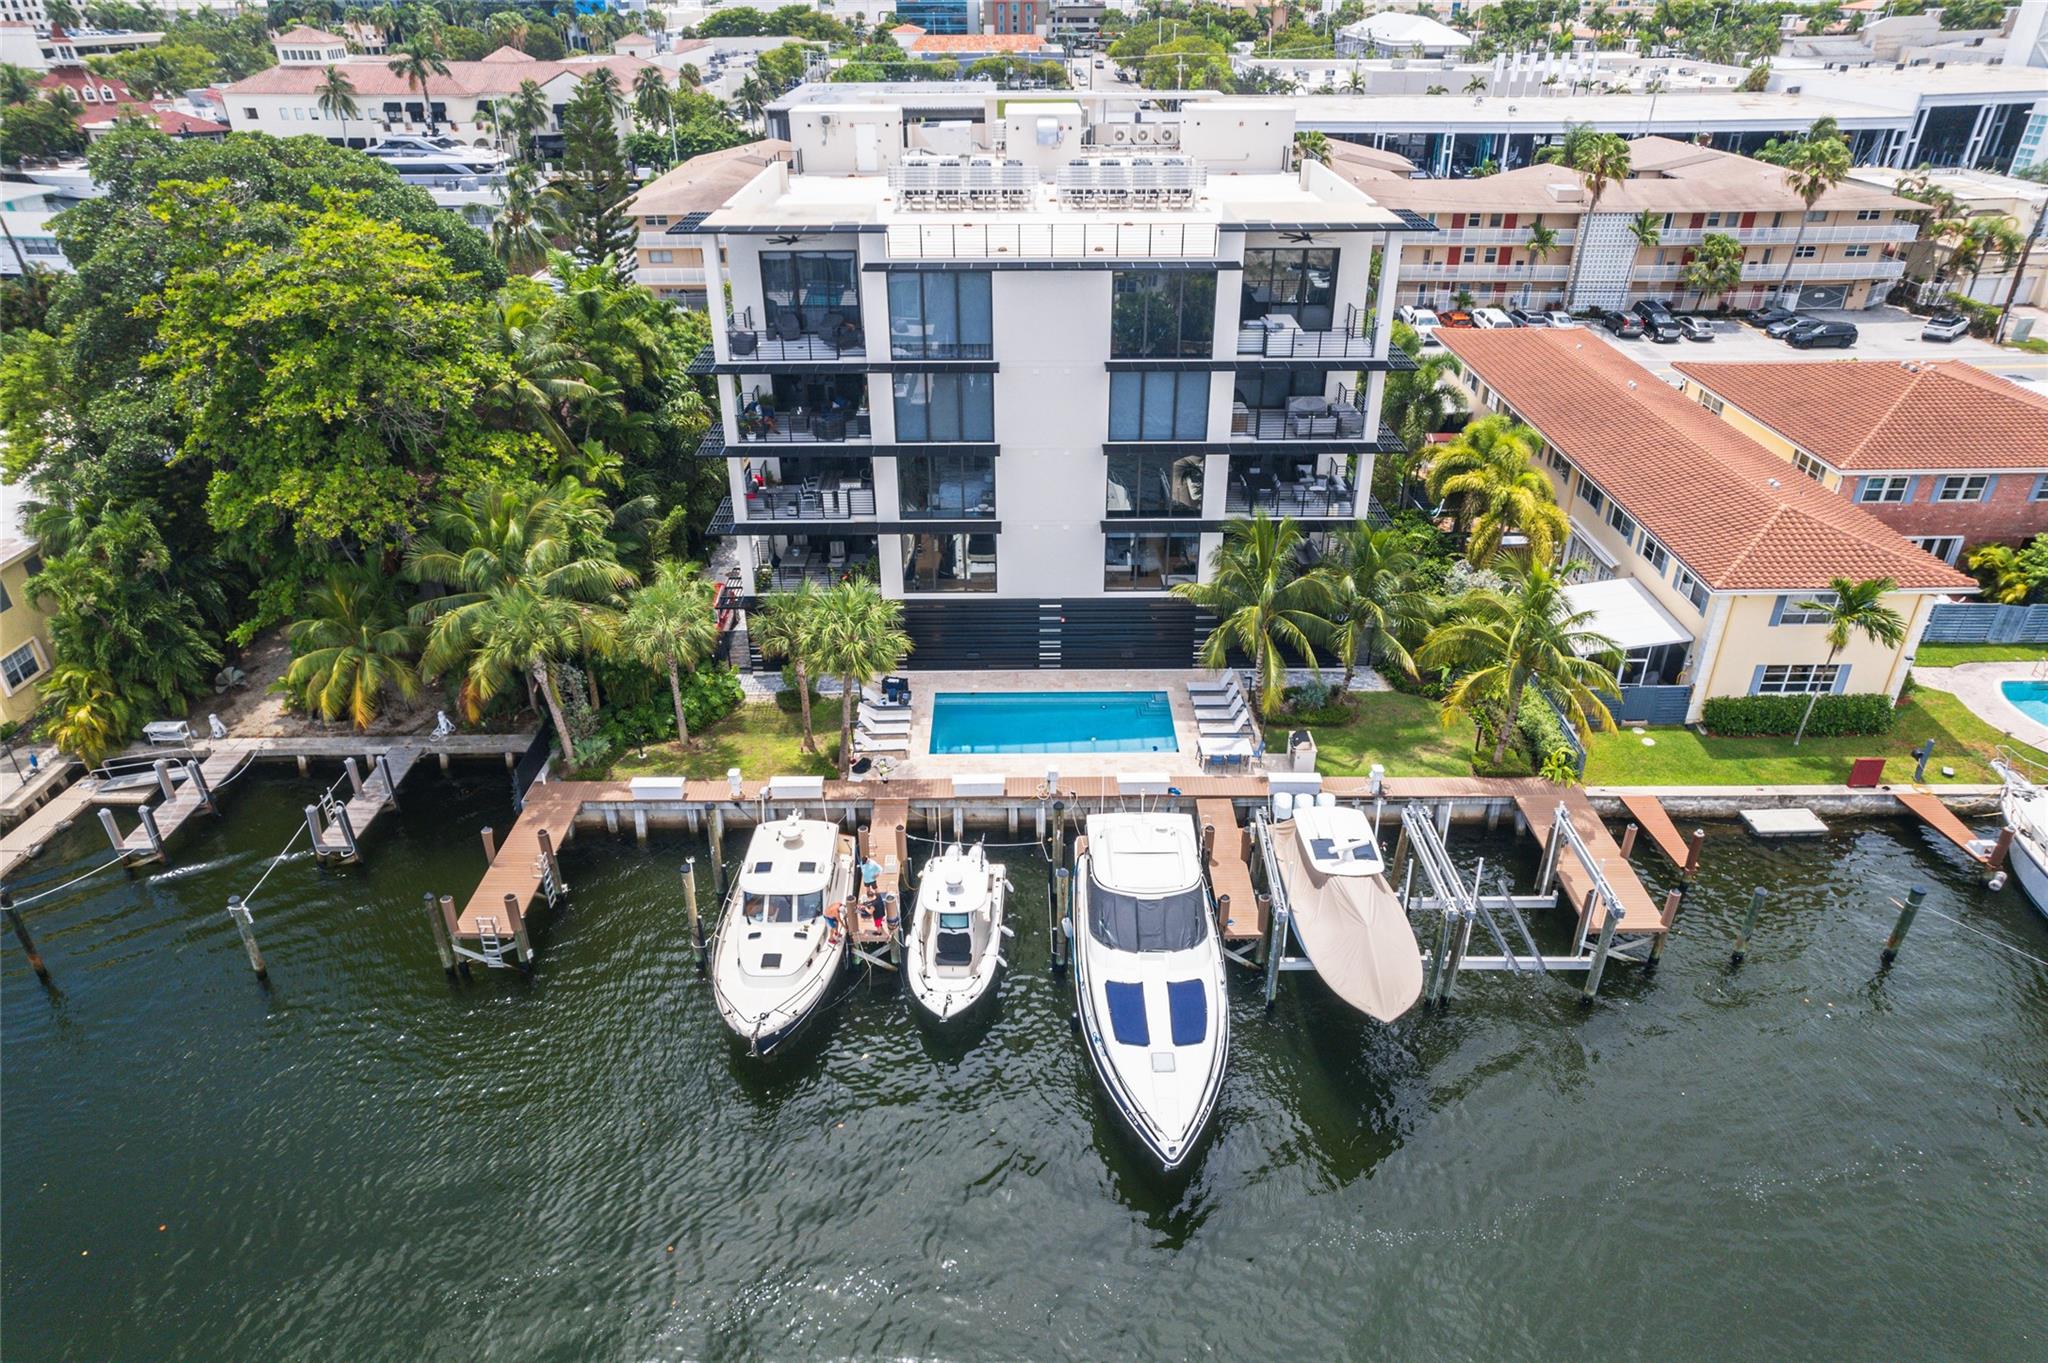 Harbors Edge - Newly Built 2022 - 3BD |3BA | Sq Ft 2,372 Stunning boutique community in the heart of Fort Lauderdale’s elite yachting community. Gorgeous corner unit professionally decorated and furnished by one of the areas top interior designers w/ large private waterfront terrace. Enjoy exquisite sunsets and spectacular city views. Floor to ceiling UV impact glass. High end fixtures, chefs kitchen w/Thermador, Fisher Paykel appliances, spacious living & dining area w/ impressive views, walk-in closets, walk-in pantry, enthusiast wine tower, and fabulous bedroom views. Custom glass interior wall w/ barn door, new built- ins for office, storage. Building is equipped w/emergency generator, 2 assigned garage parking spots. Minutes from, beaches, FLL airport, restaurants, Las Olas & Downtown